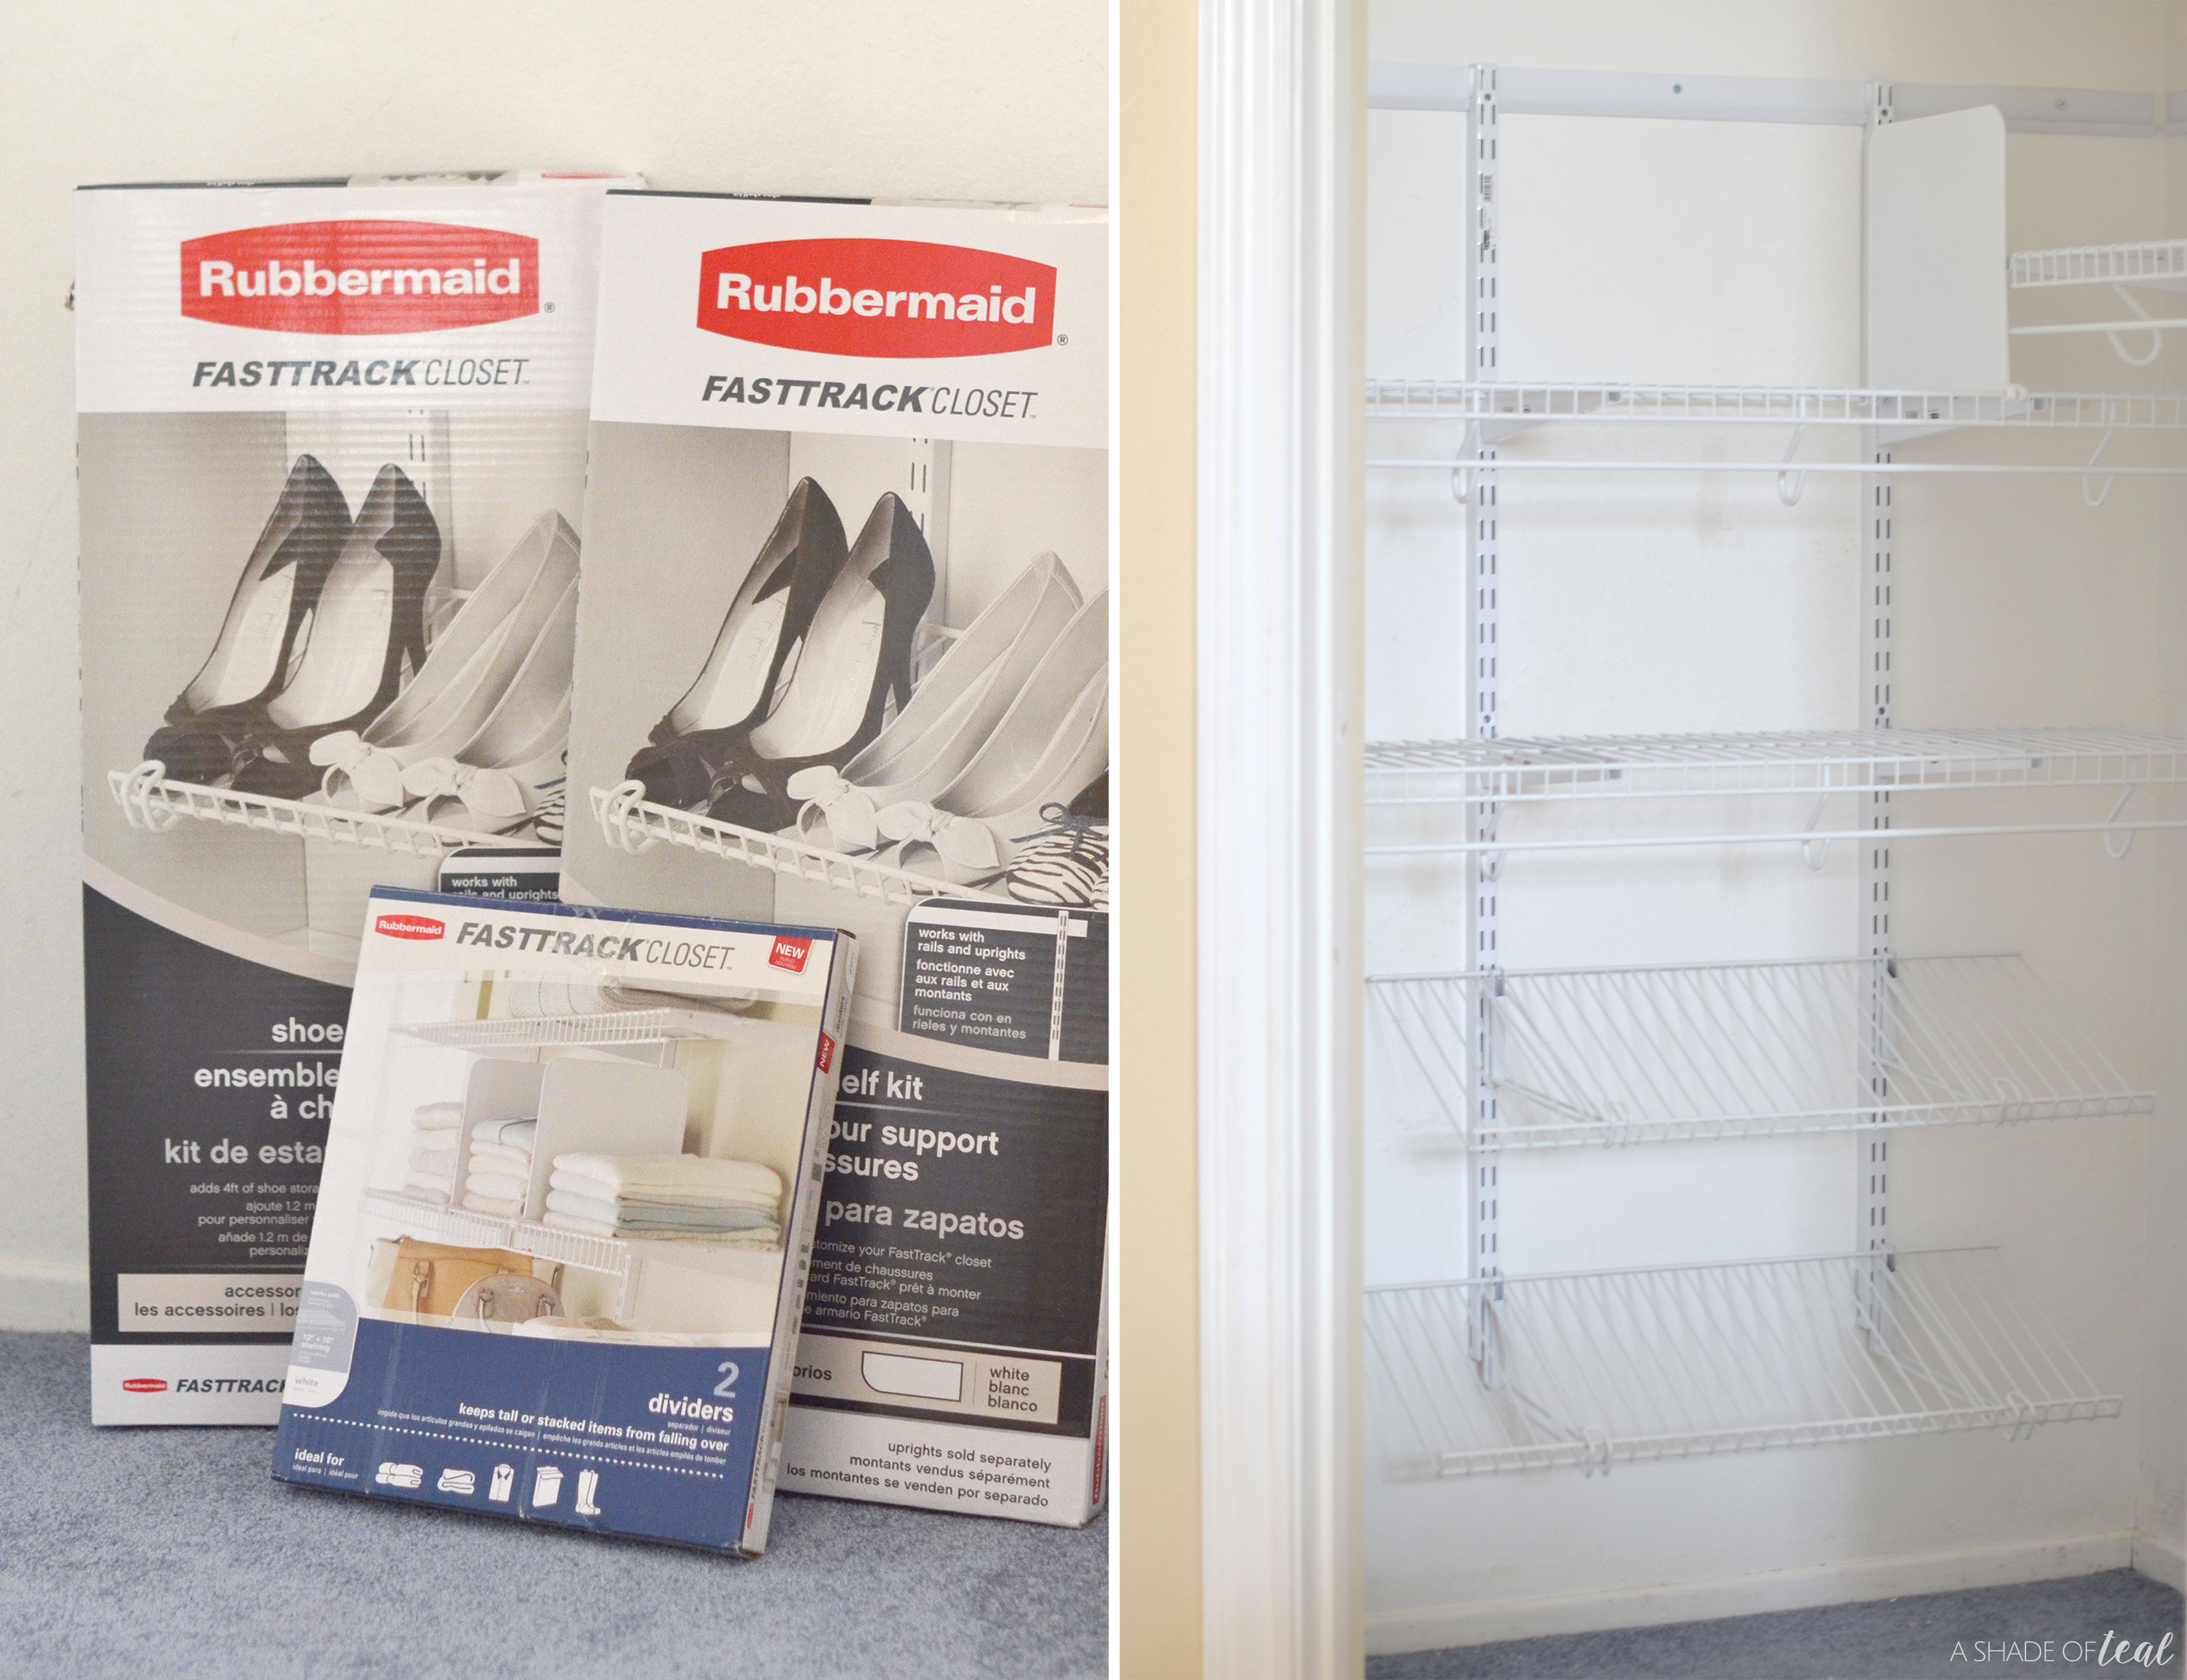 You can create an organized closet with this Rubbermaid Fast Track